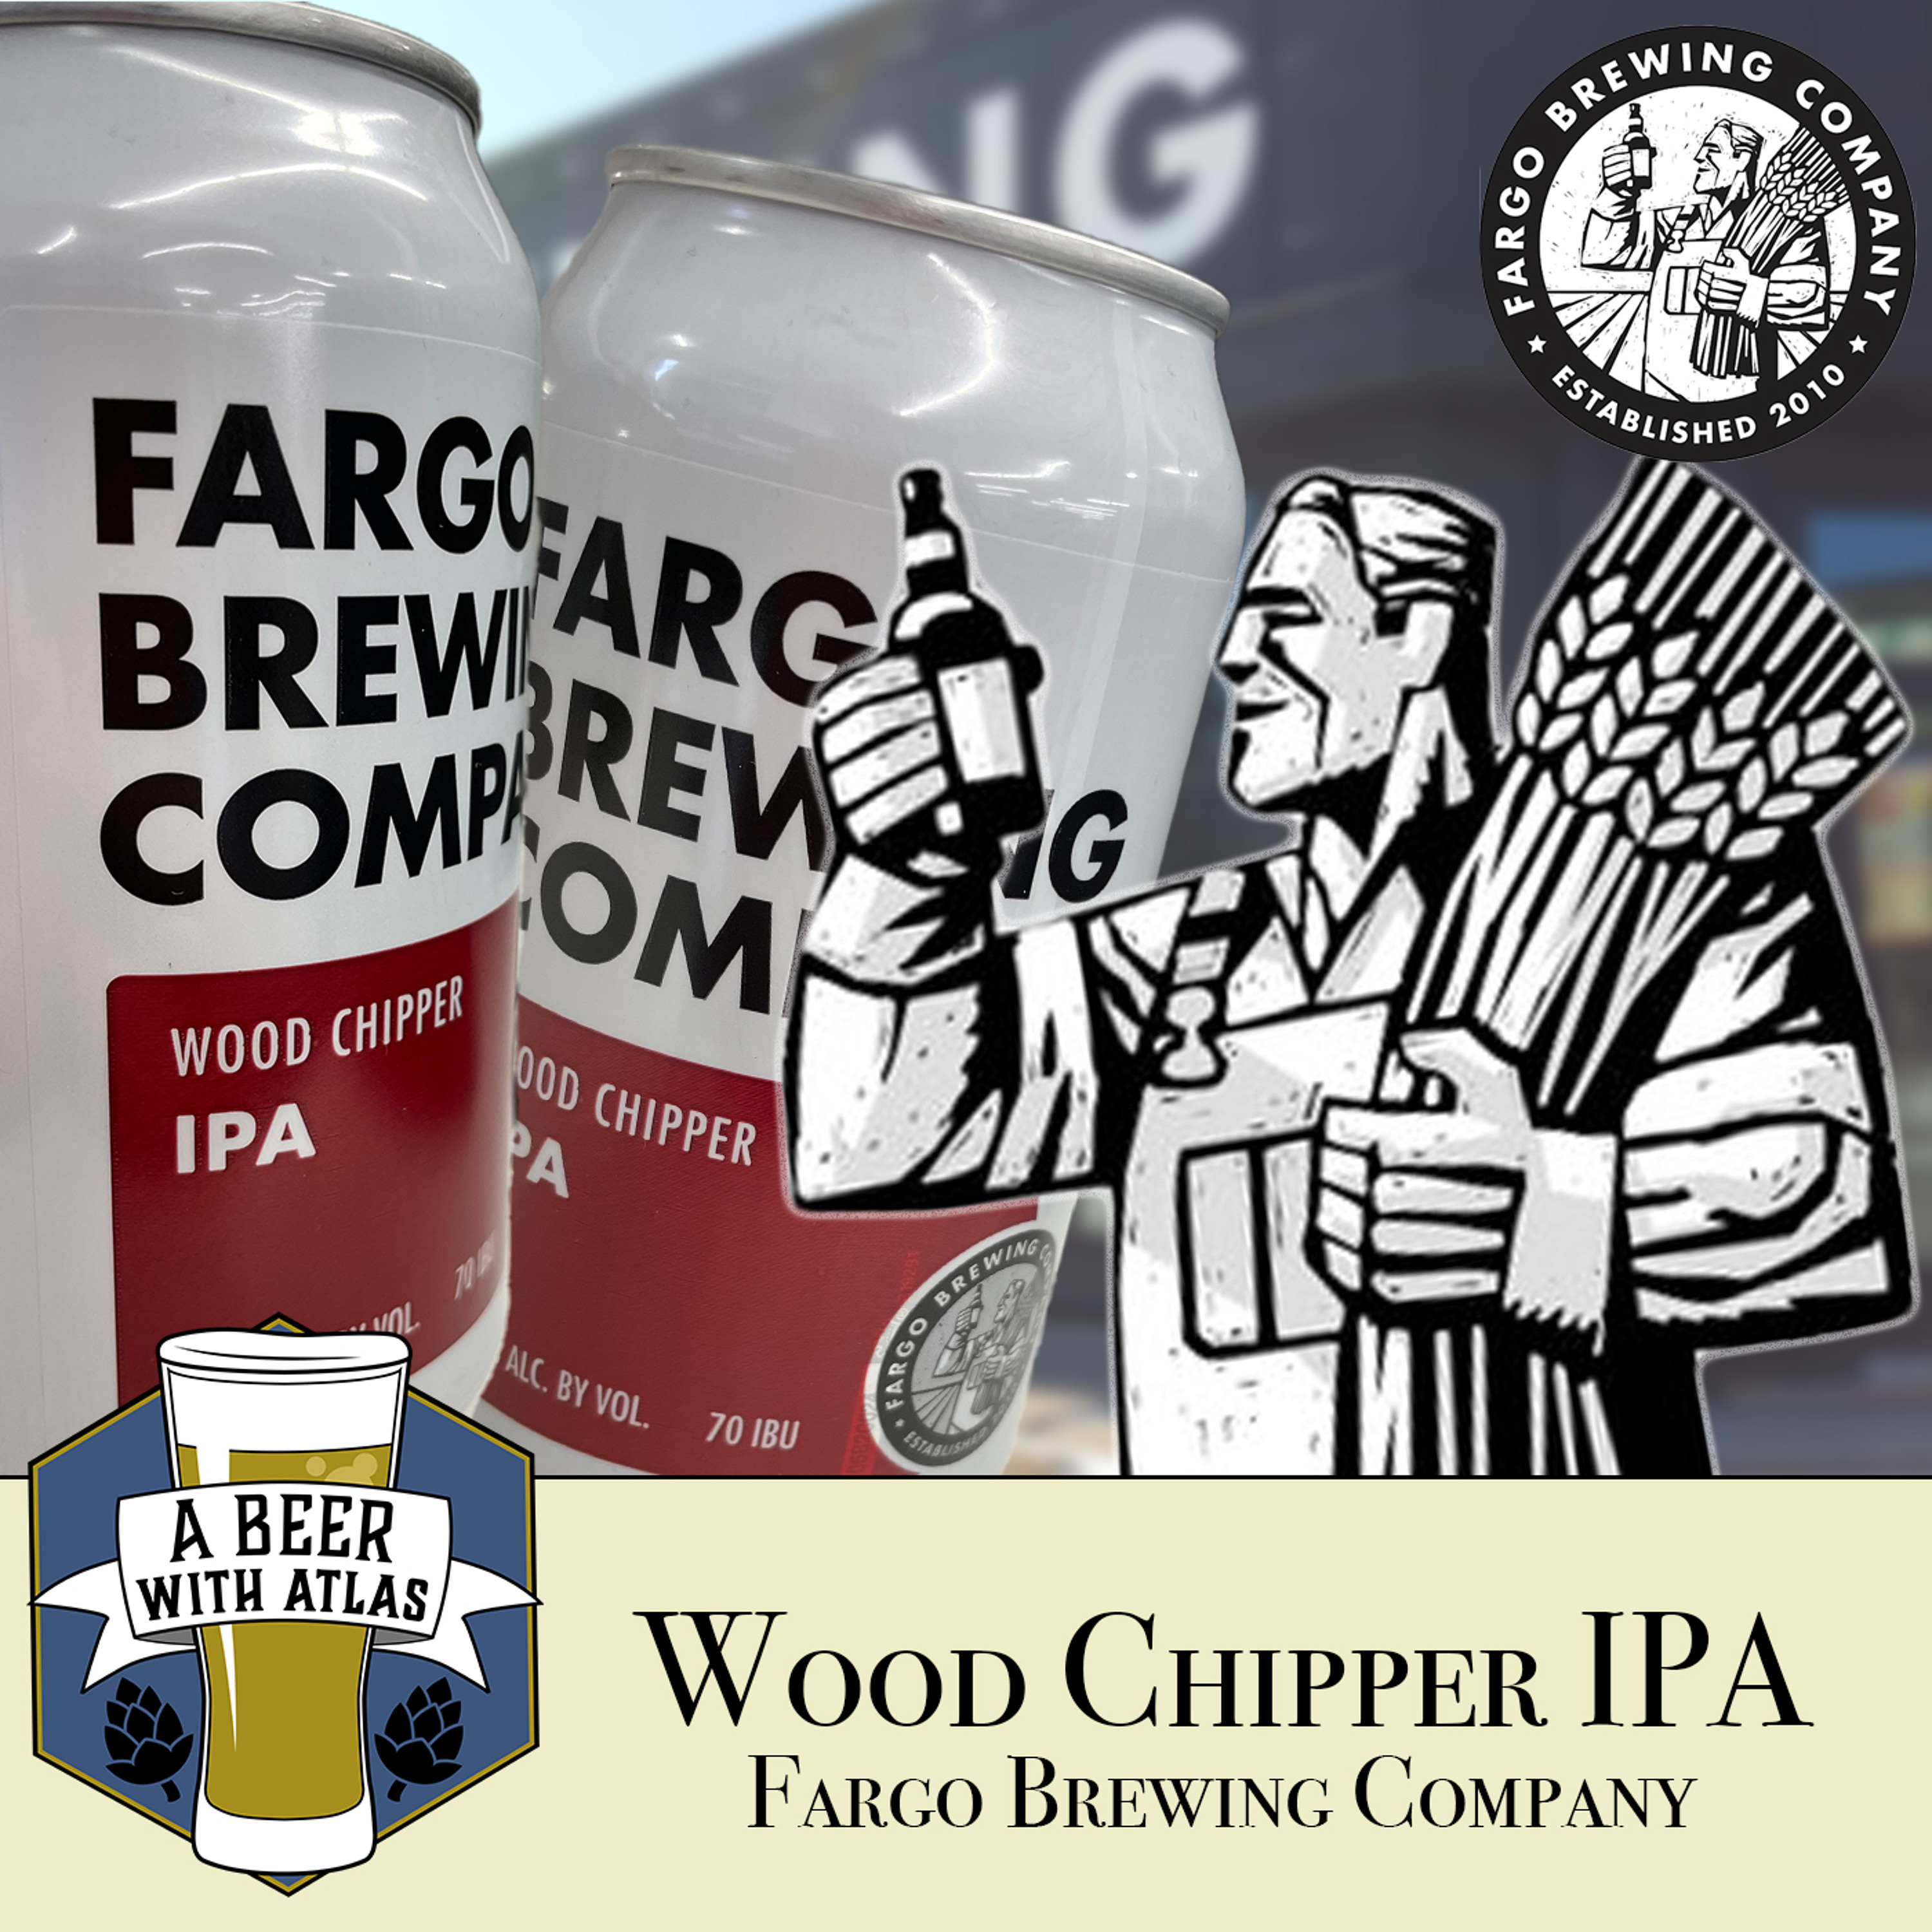 Wood Chipper IPA from Fargo Brewing Company | Our First North Dakota Beer - A Beer with Atlas 173